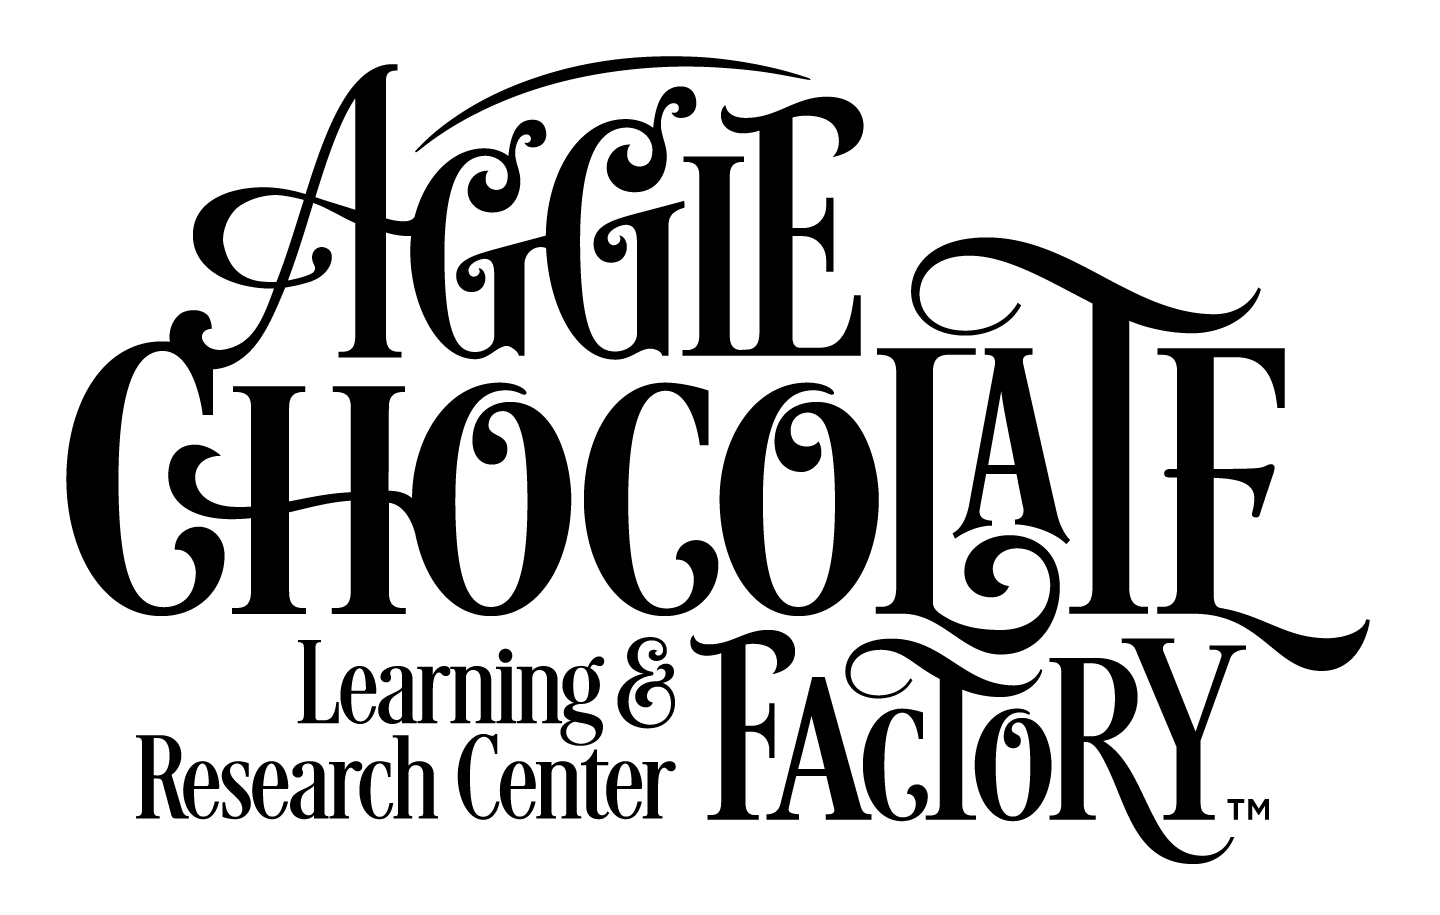 Aggie Chocolate Factory